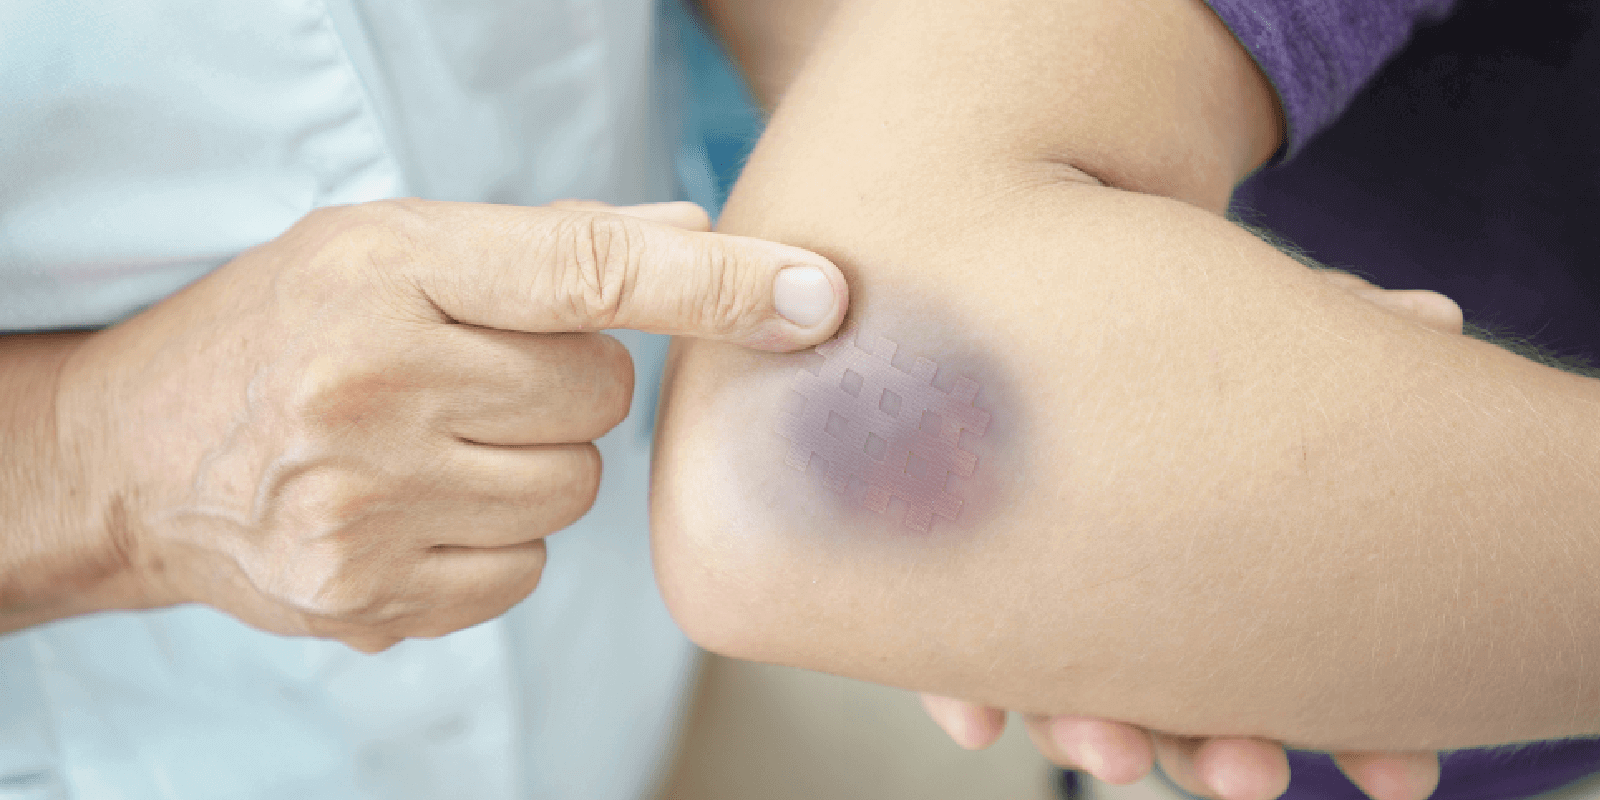 first-aid-bruise